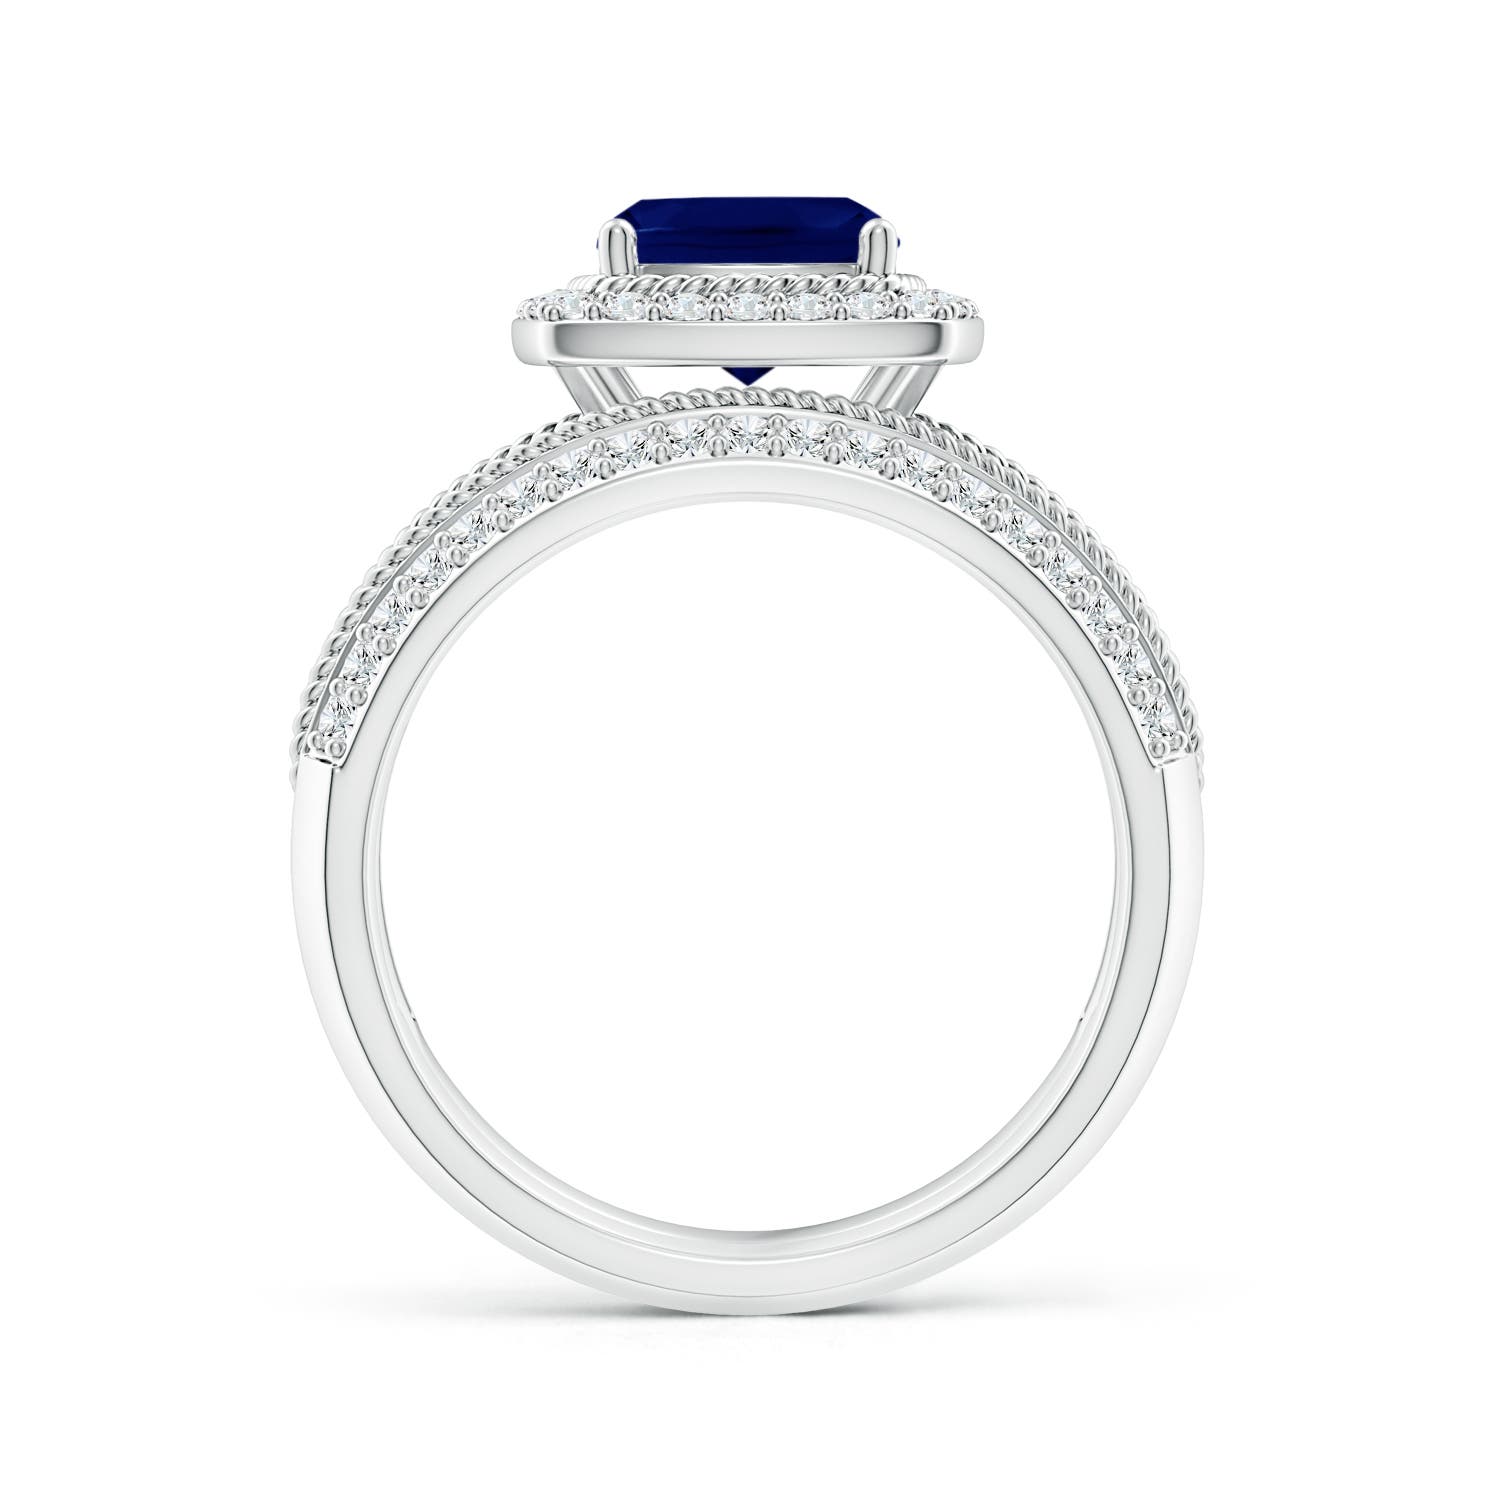 AA - Blue Sapphire / 2.42 CT / 14 KT White Gold